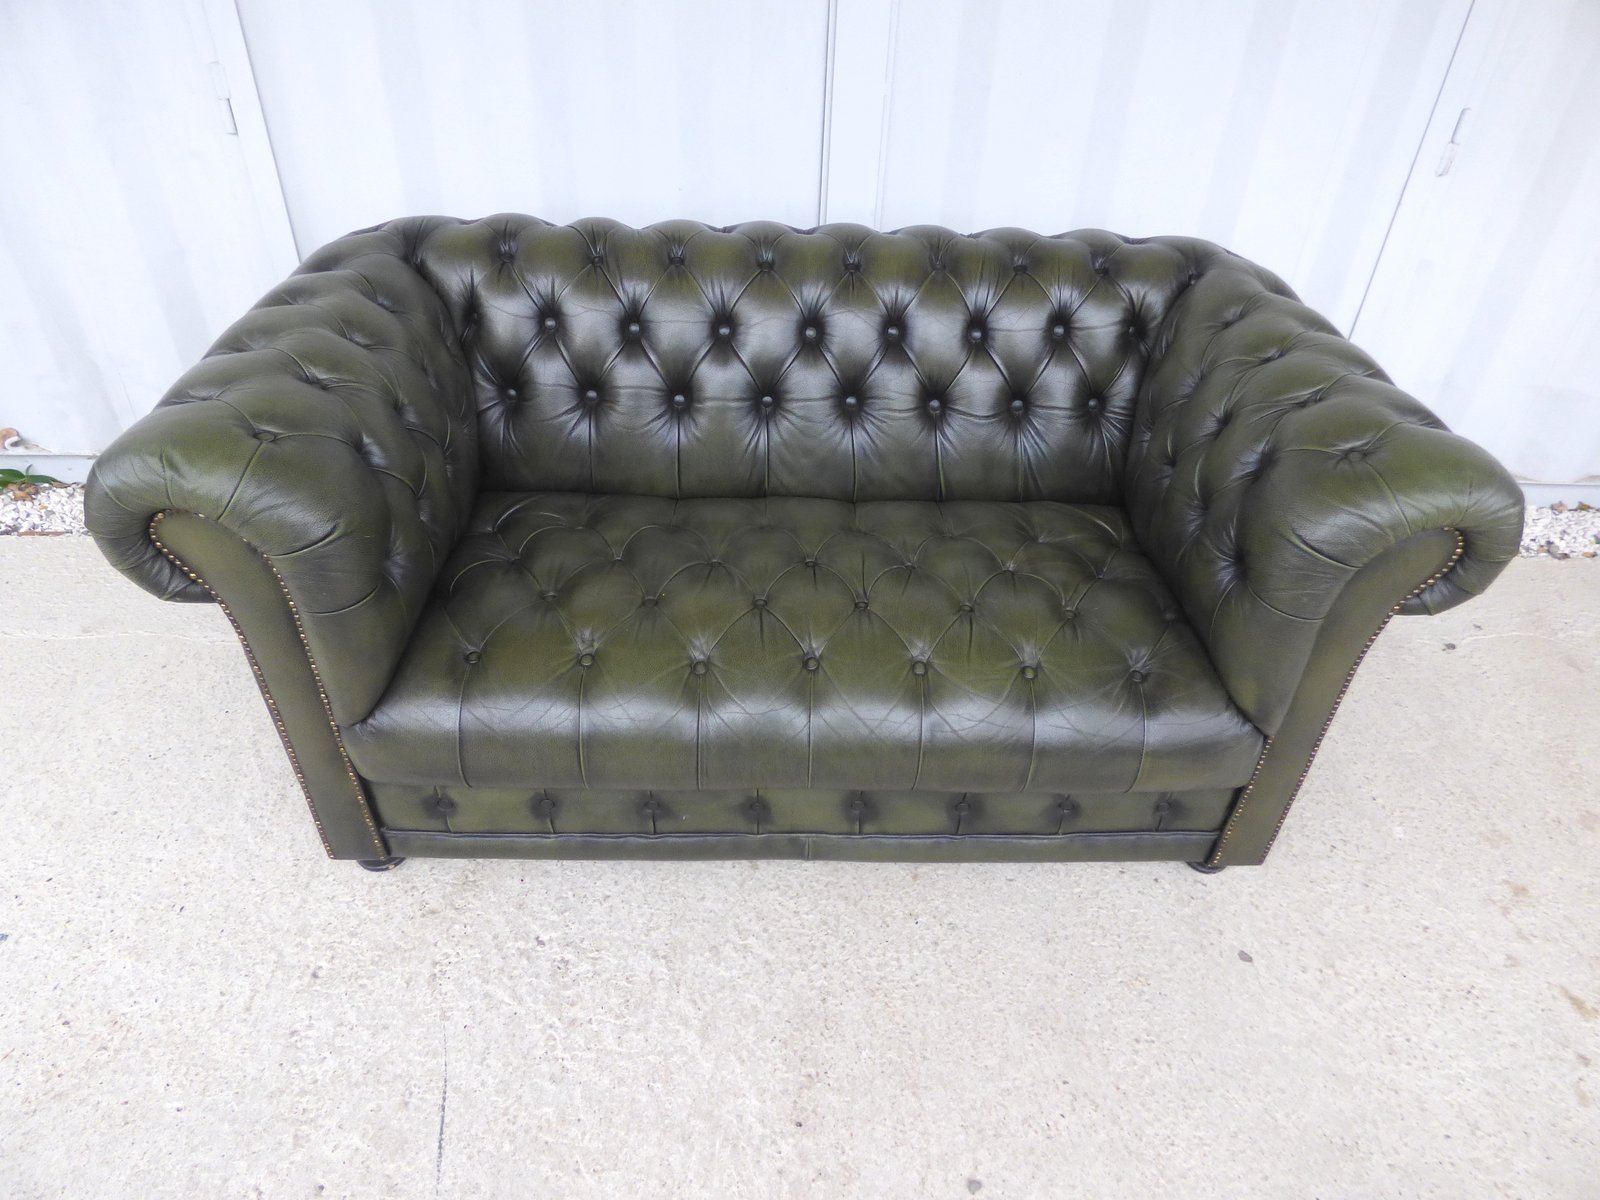 Vintage French Chesterfield Sofa 1970s For Sale At Pamono